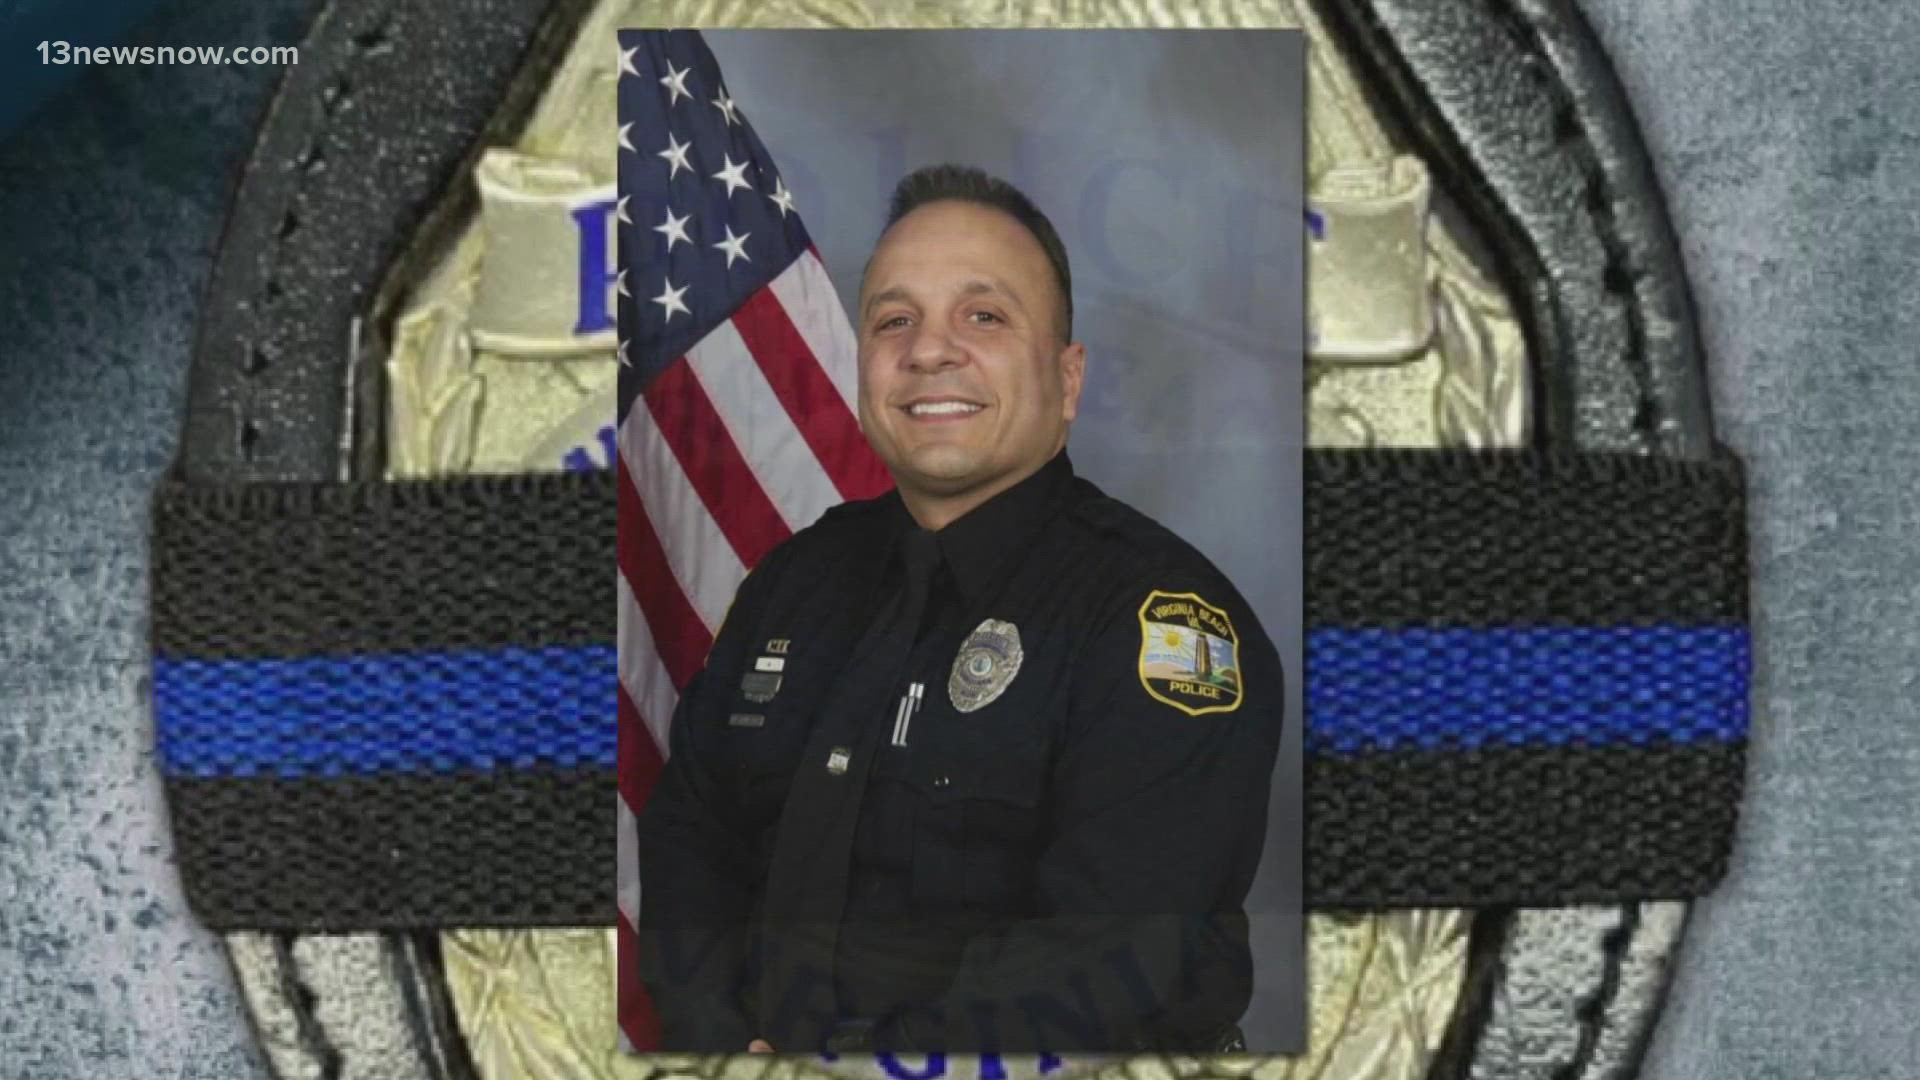 Nieves served with the Virginia Beach Police Department for 26 years. He passed away on Tuesday.